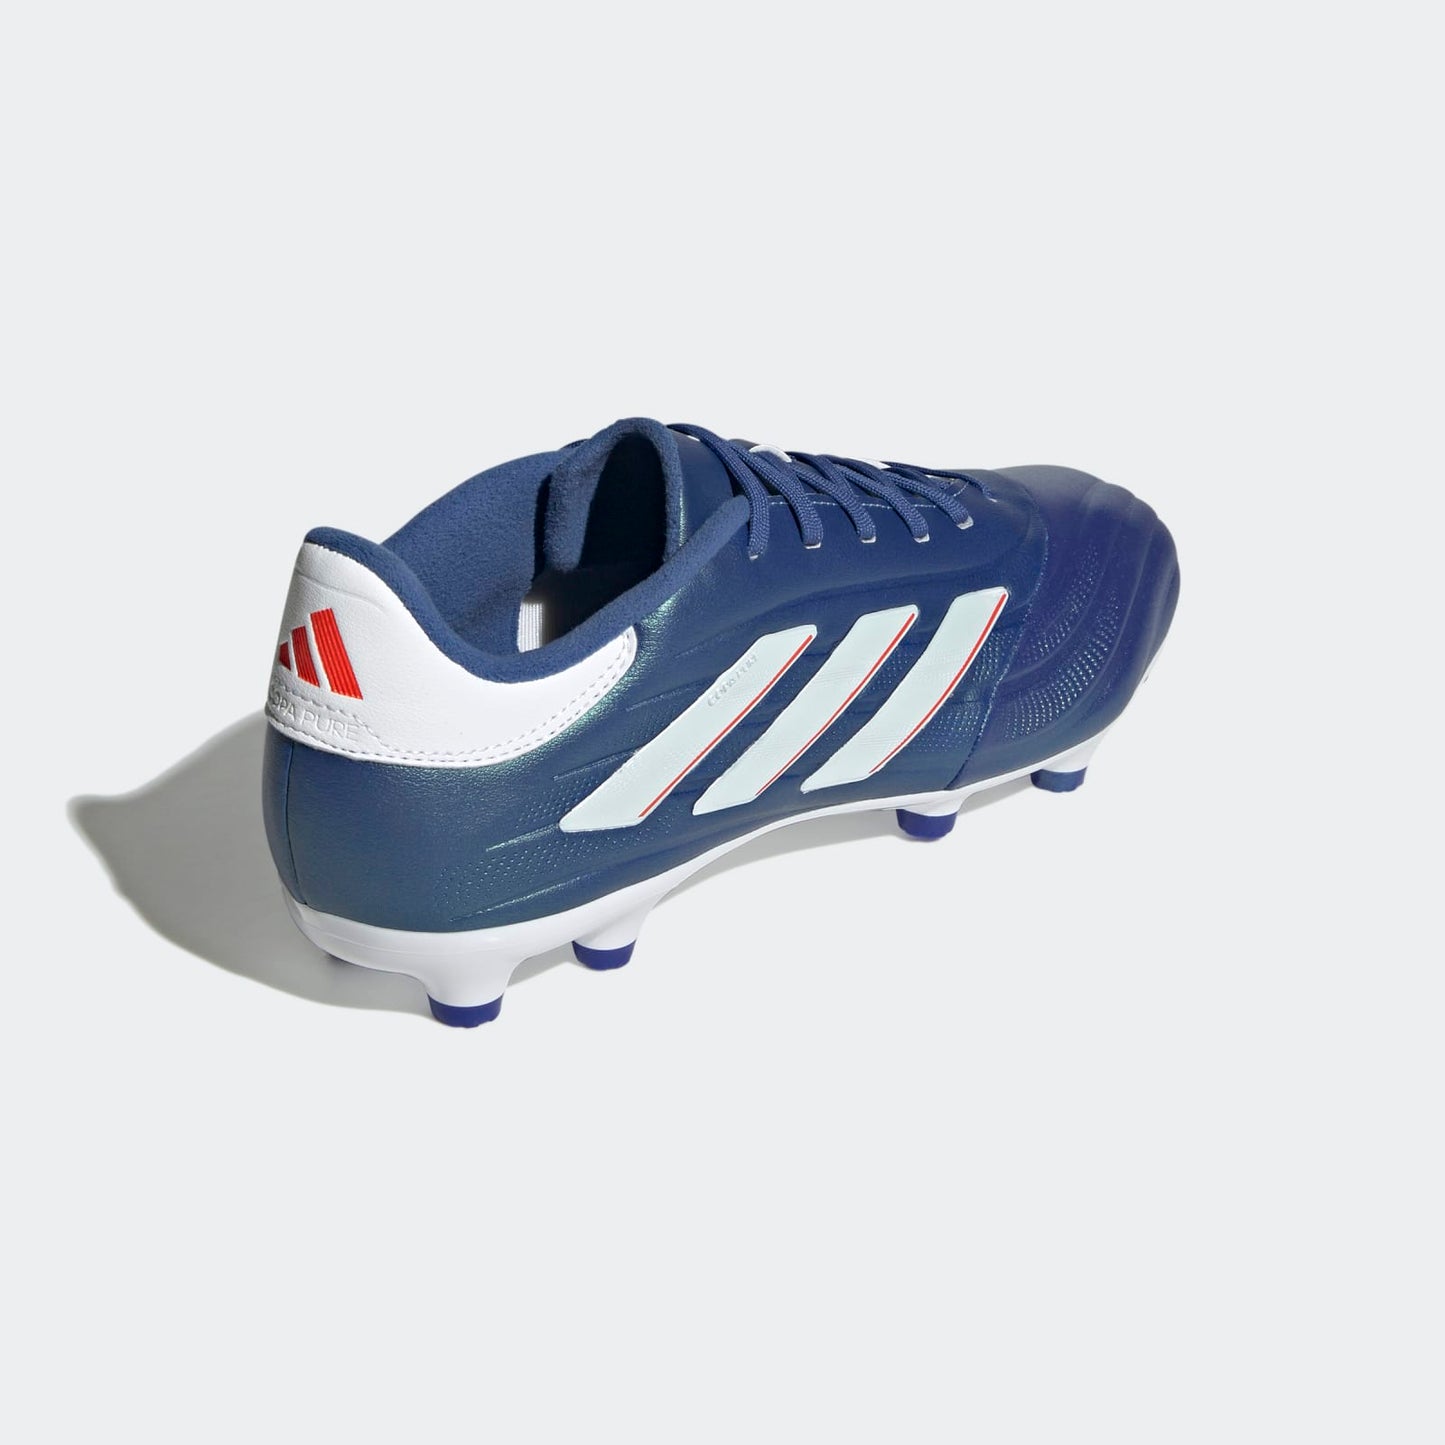 adidas Copa Pure II.3 Firm Ground Boots